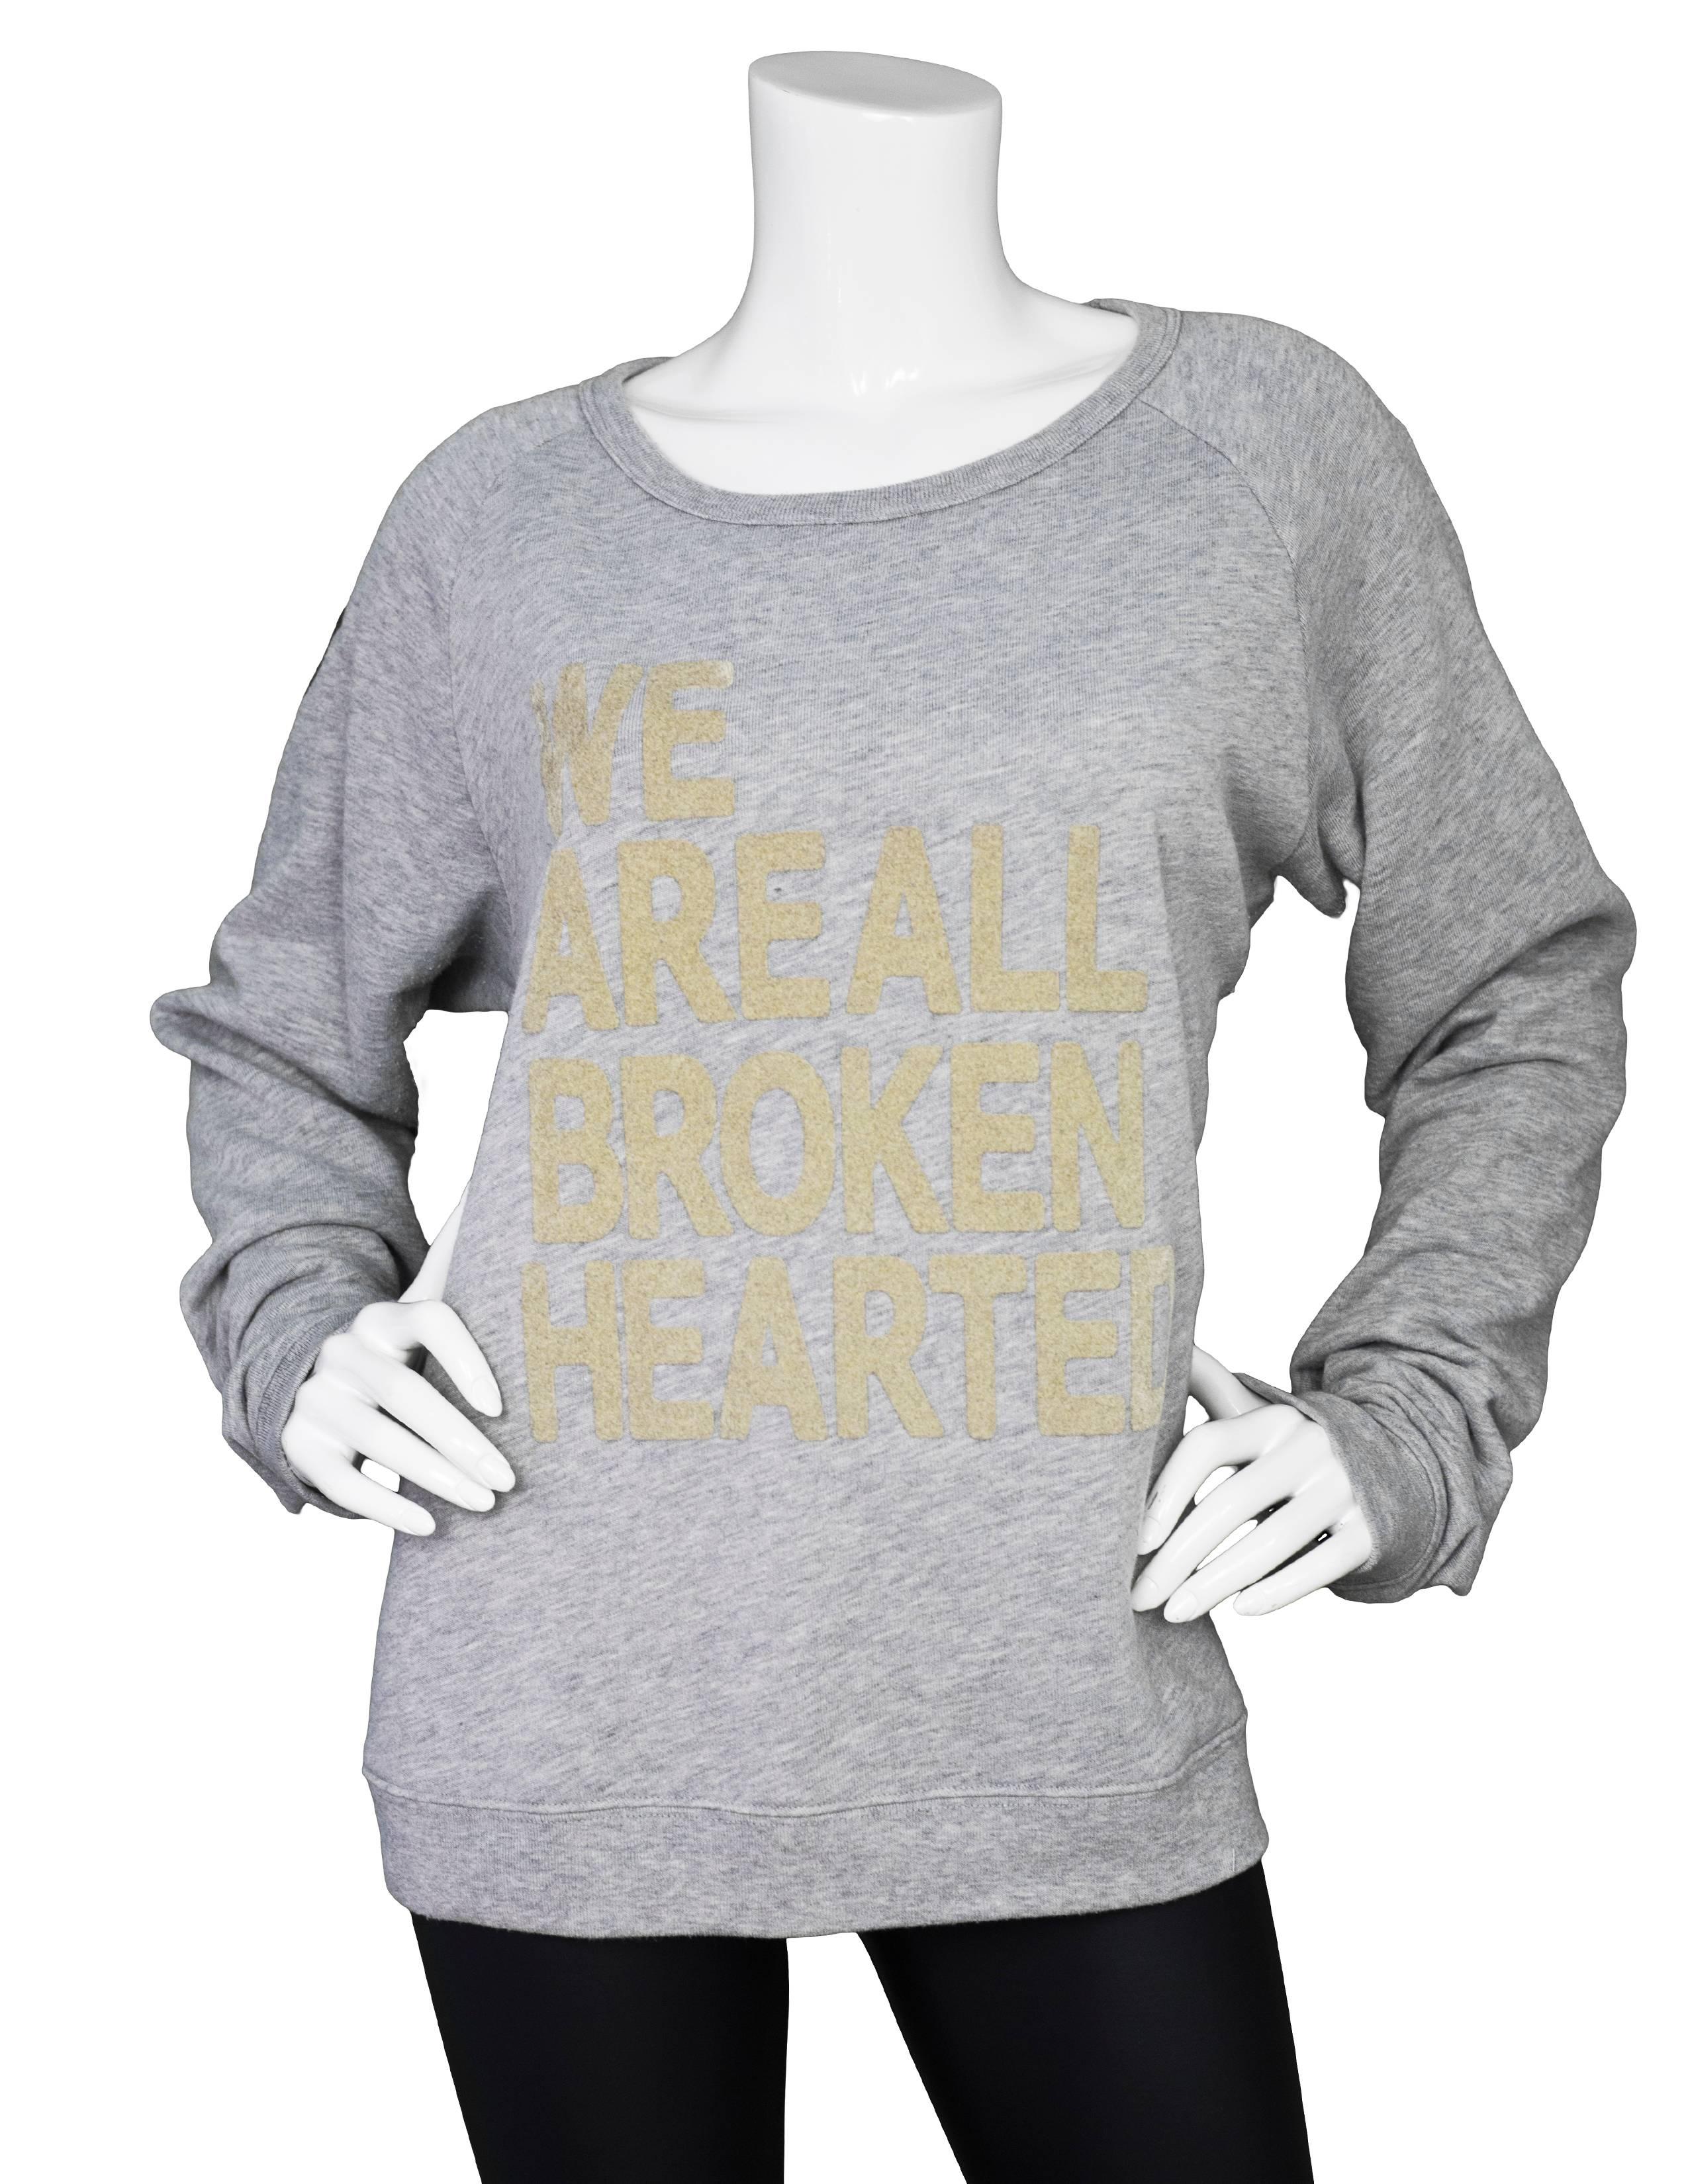 Free City Grey Sweatshirt Sz XL

Features 'We are all broken hearted' print

Color: Grey
Composition: 58% polyester, 42% cotton
Lining: None
Closure/Opening: Pull over
Exterior Pockets: None
Interior Pockets: None
Retail Price: $235 + tax
Overall